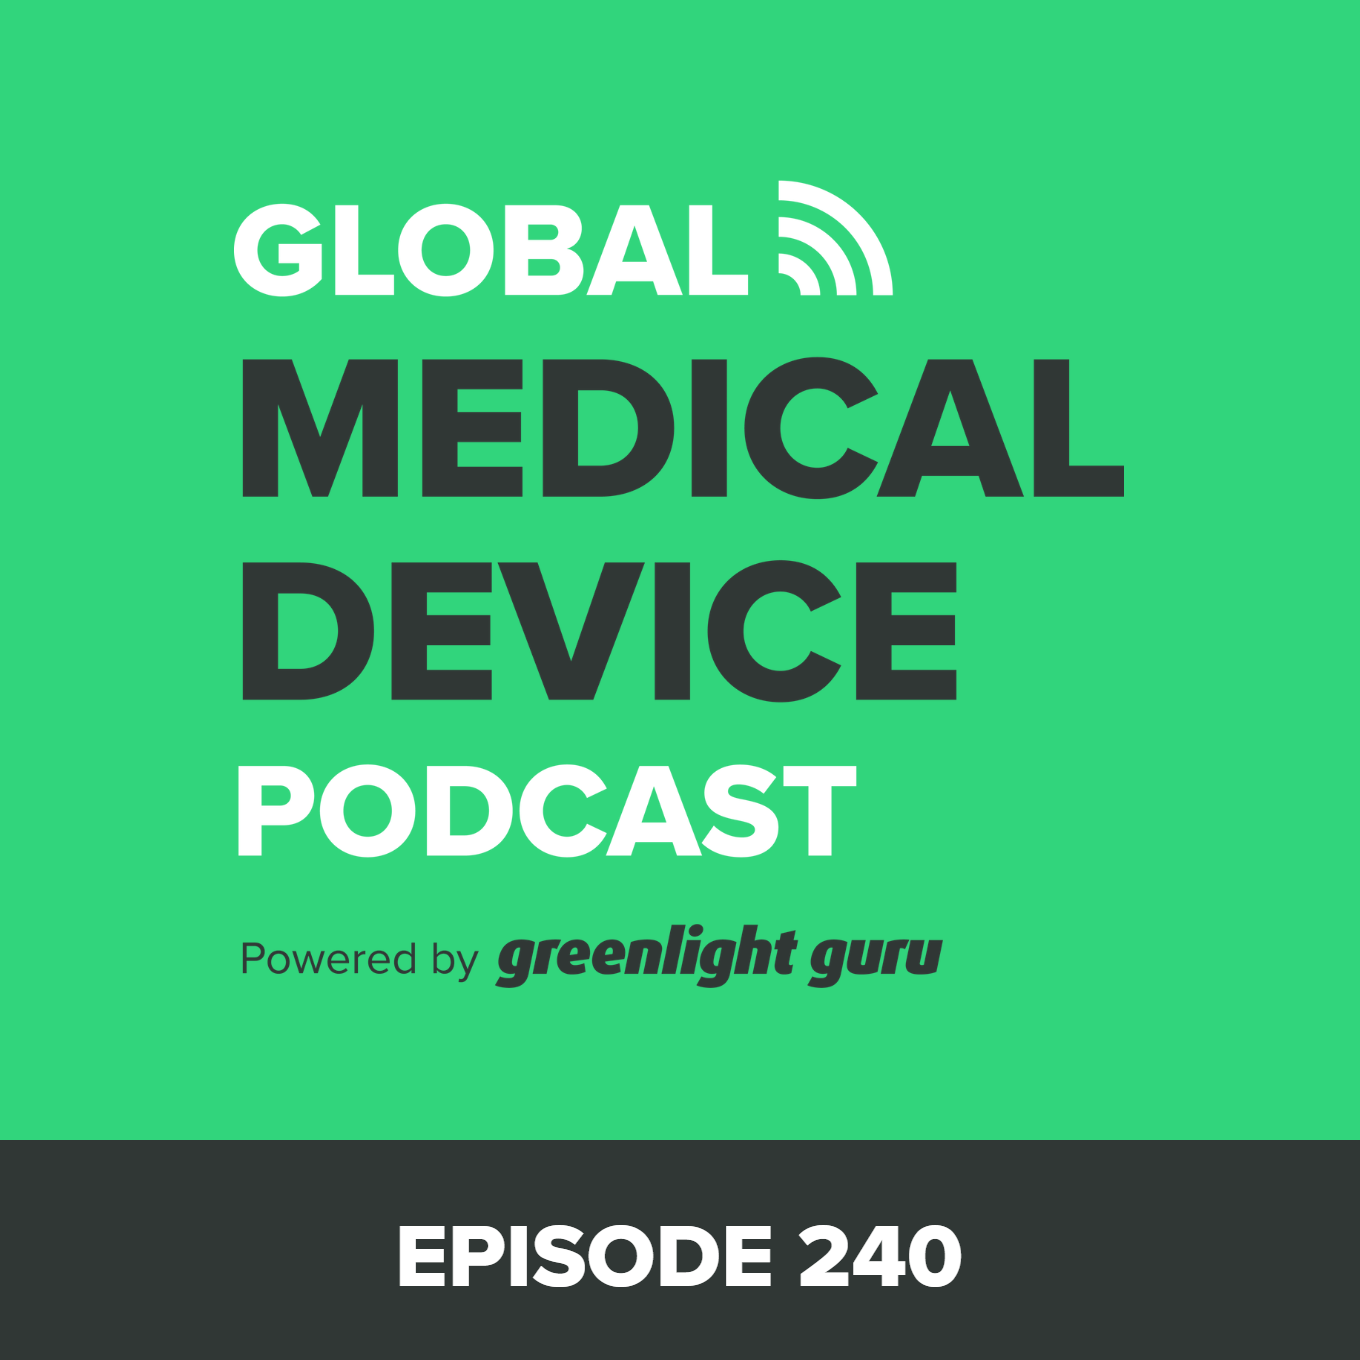 Shaking Things Up: What's Next for the Global Medical Device Podcast